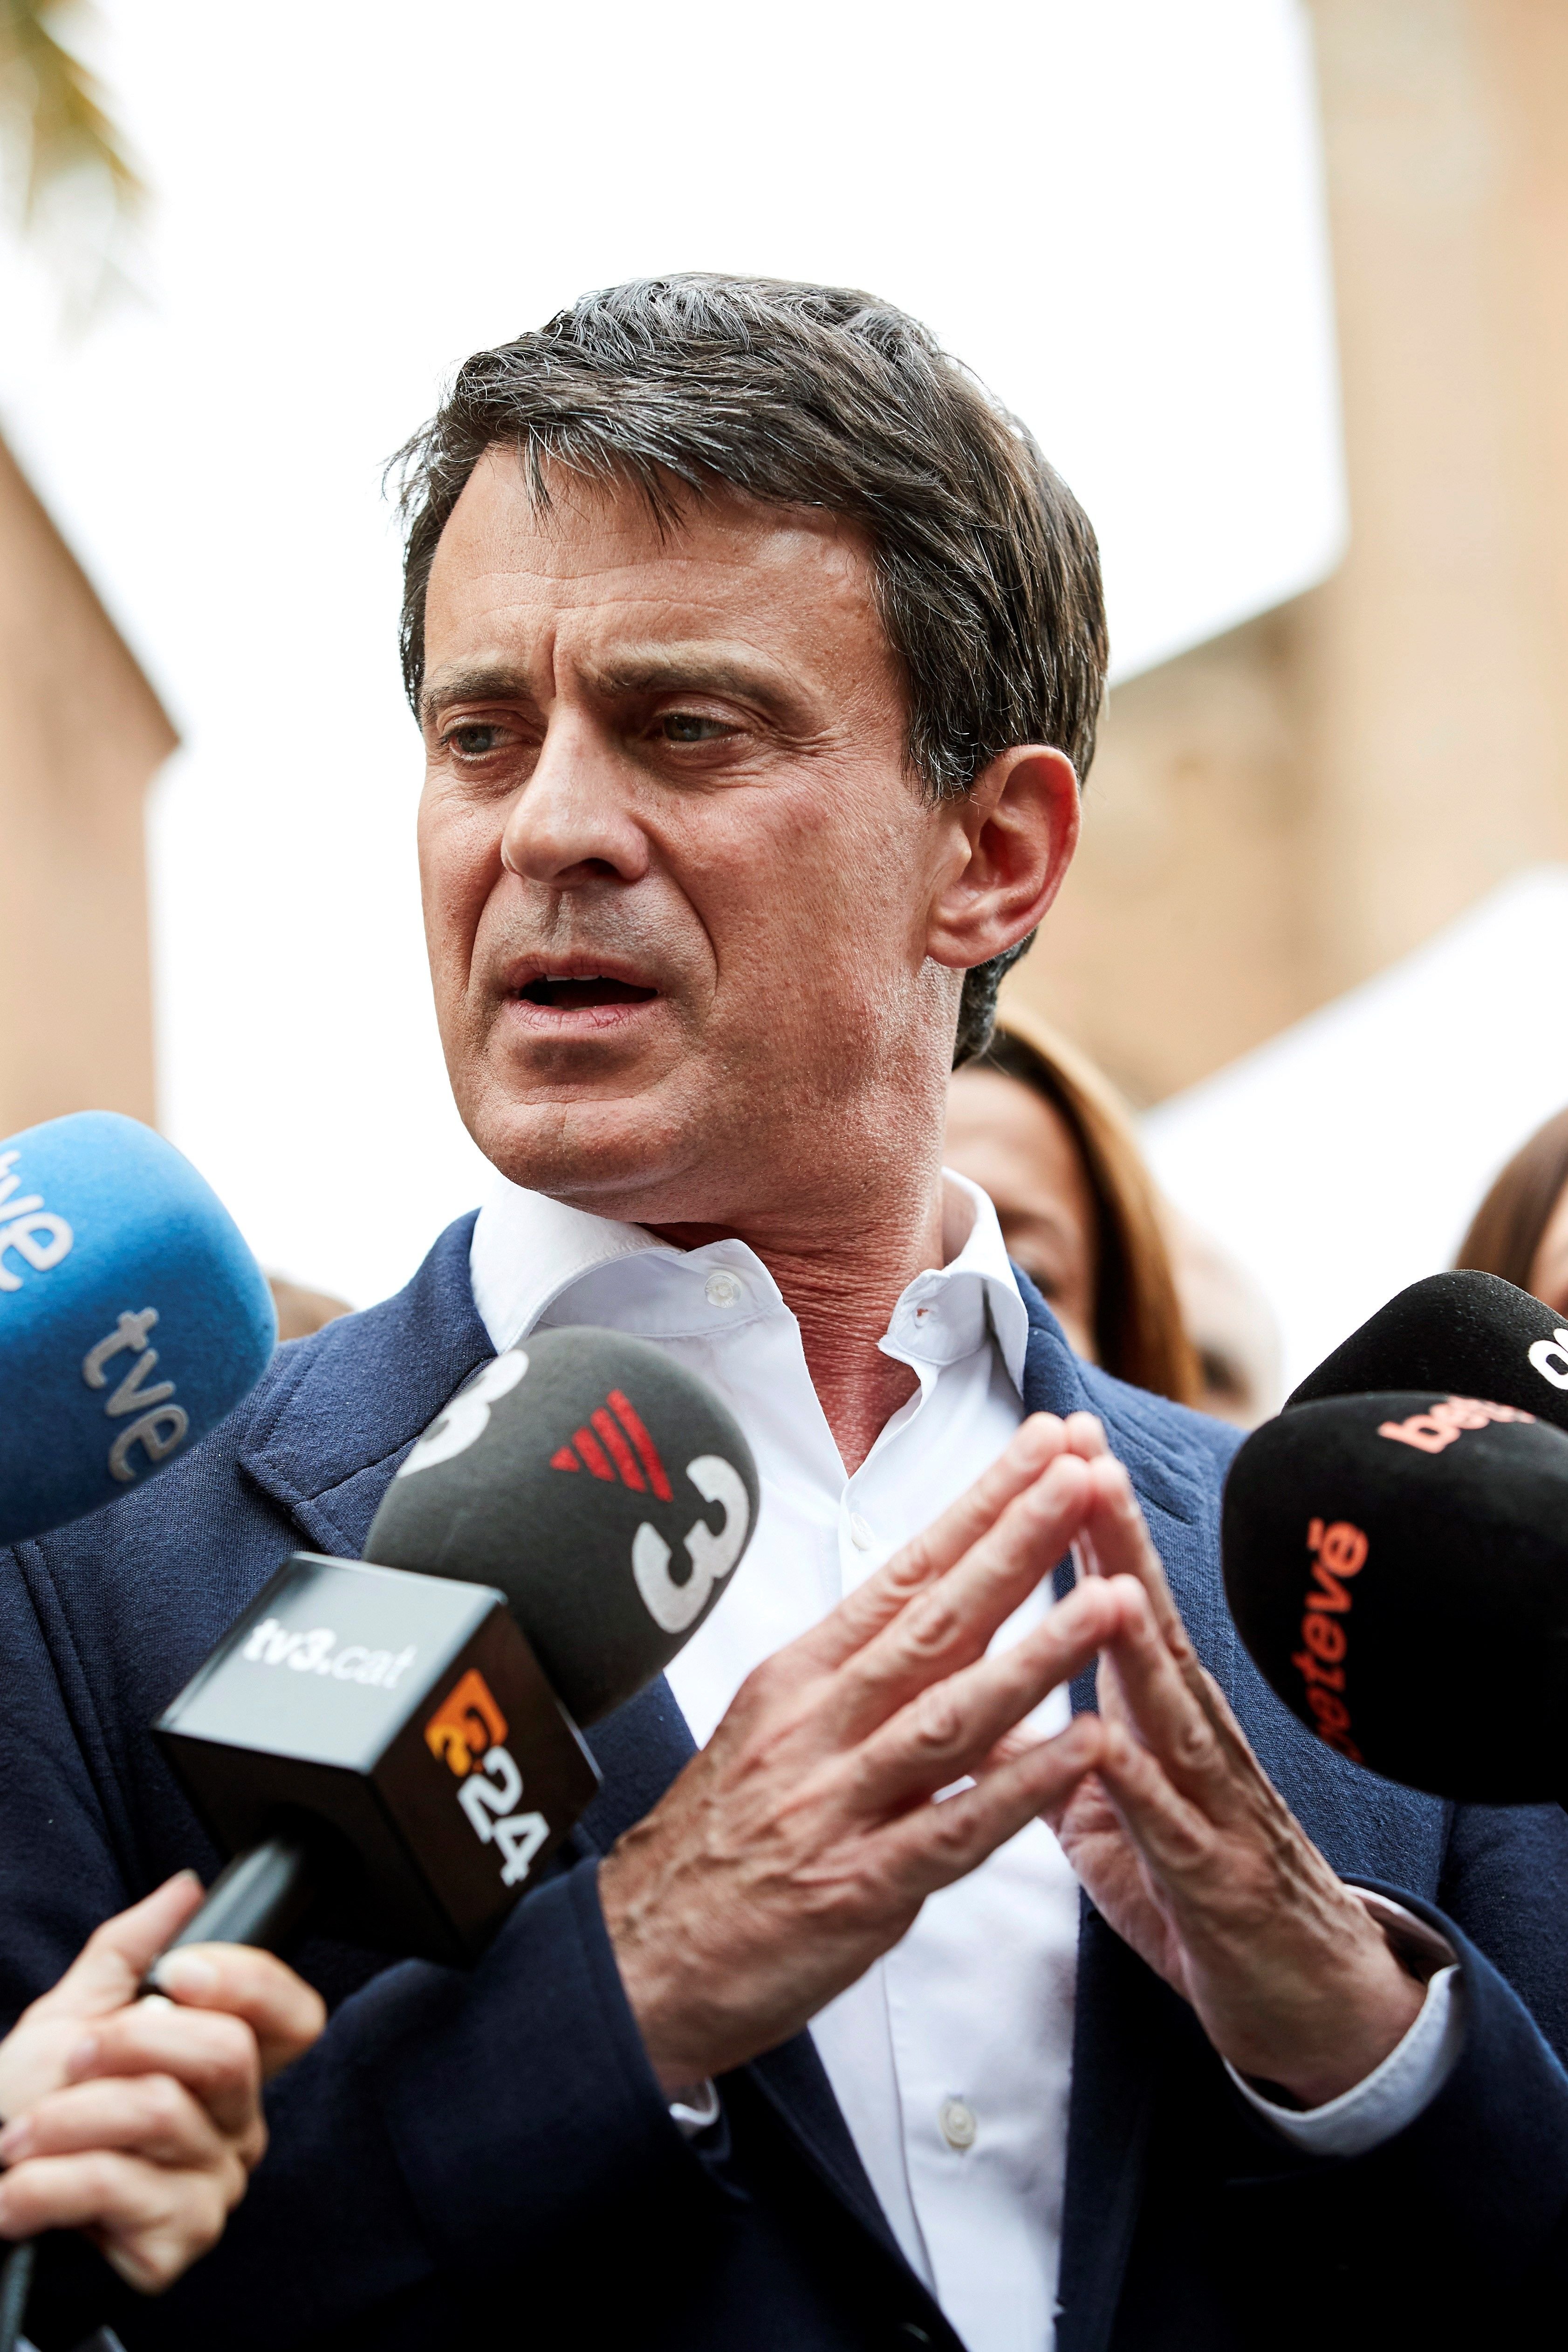 Manuel Valls "unable to hide" his concern about Cs negotiating with Vox